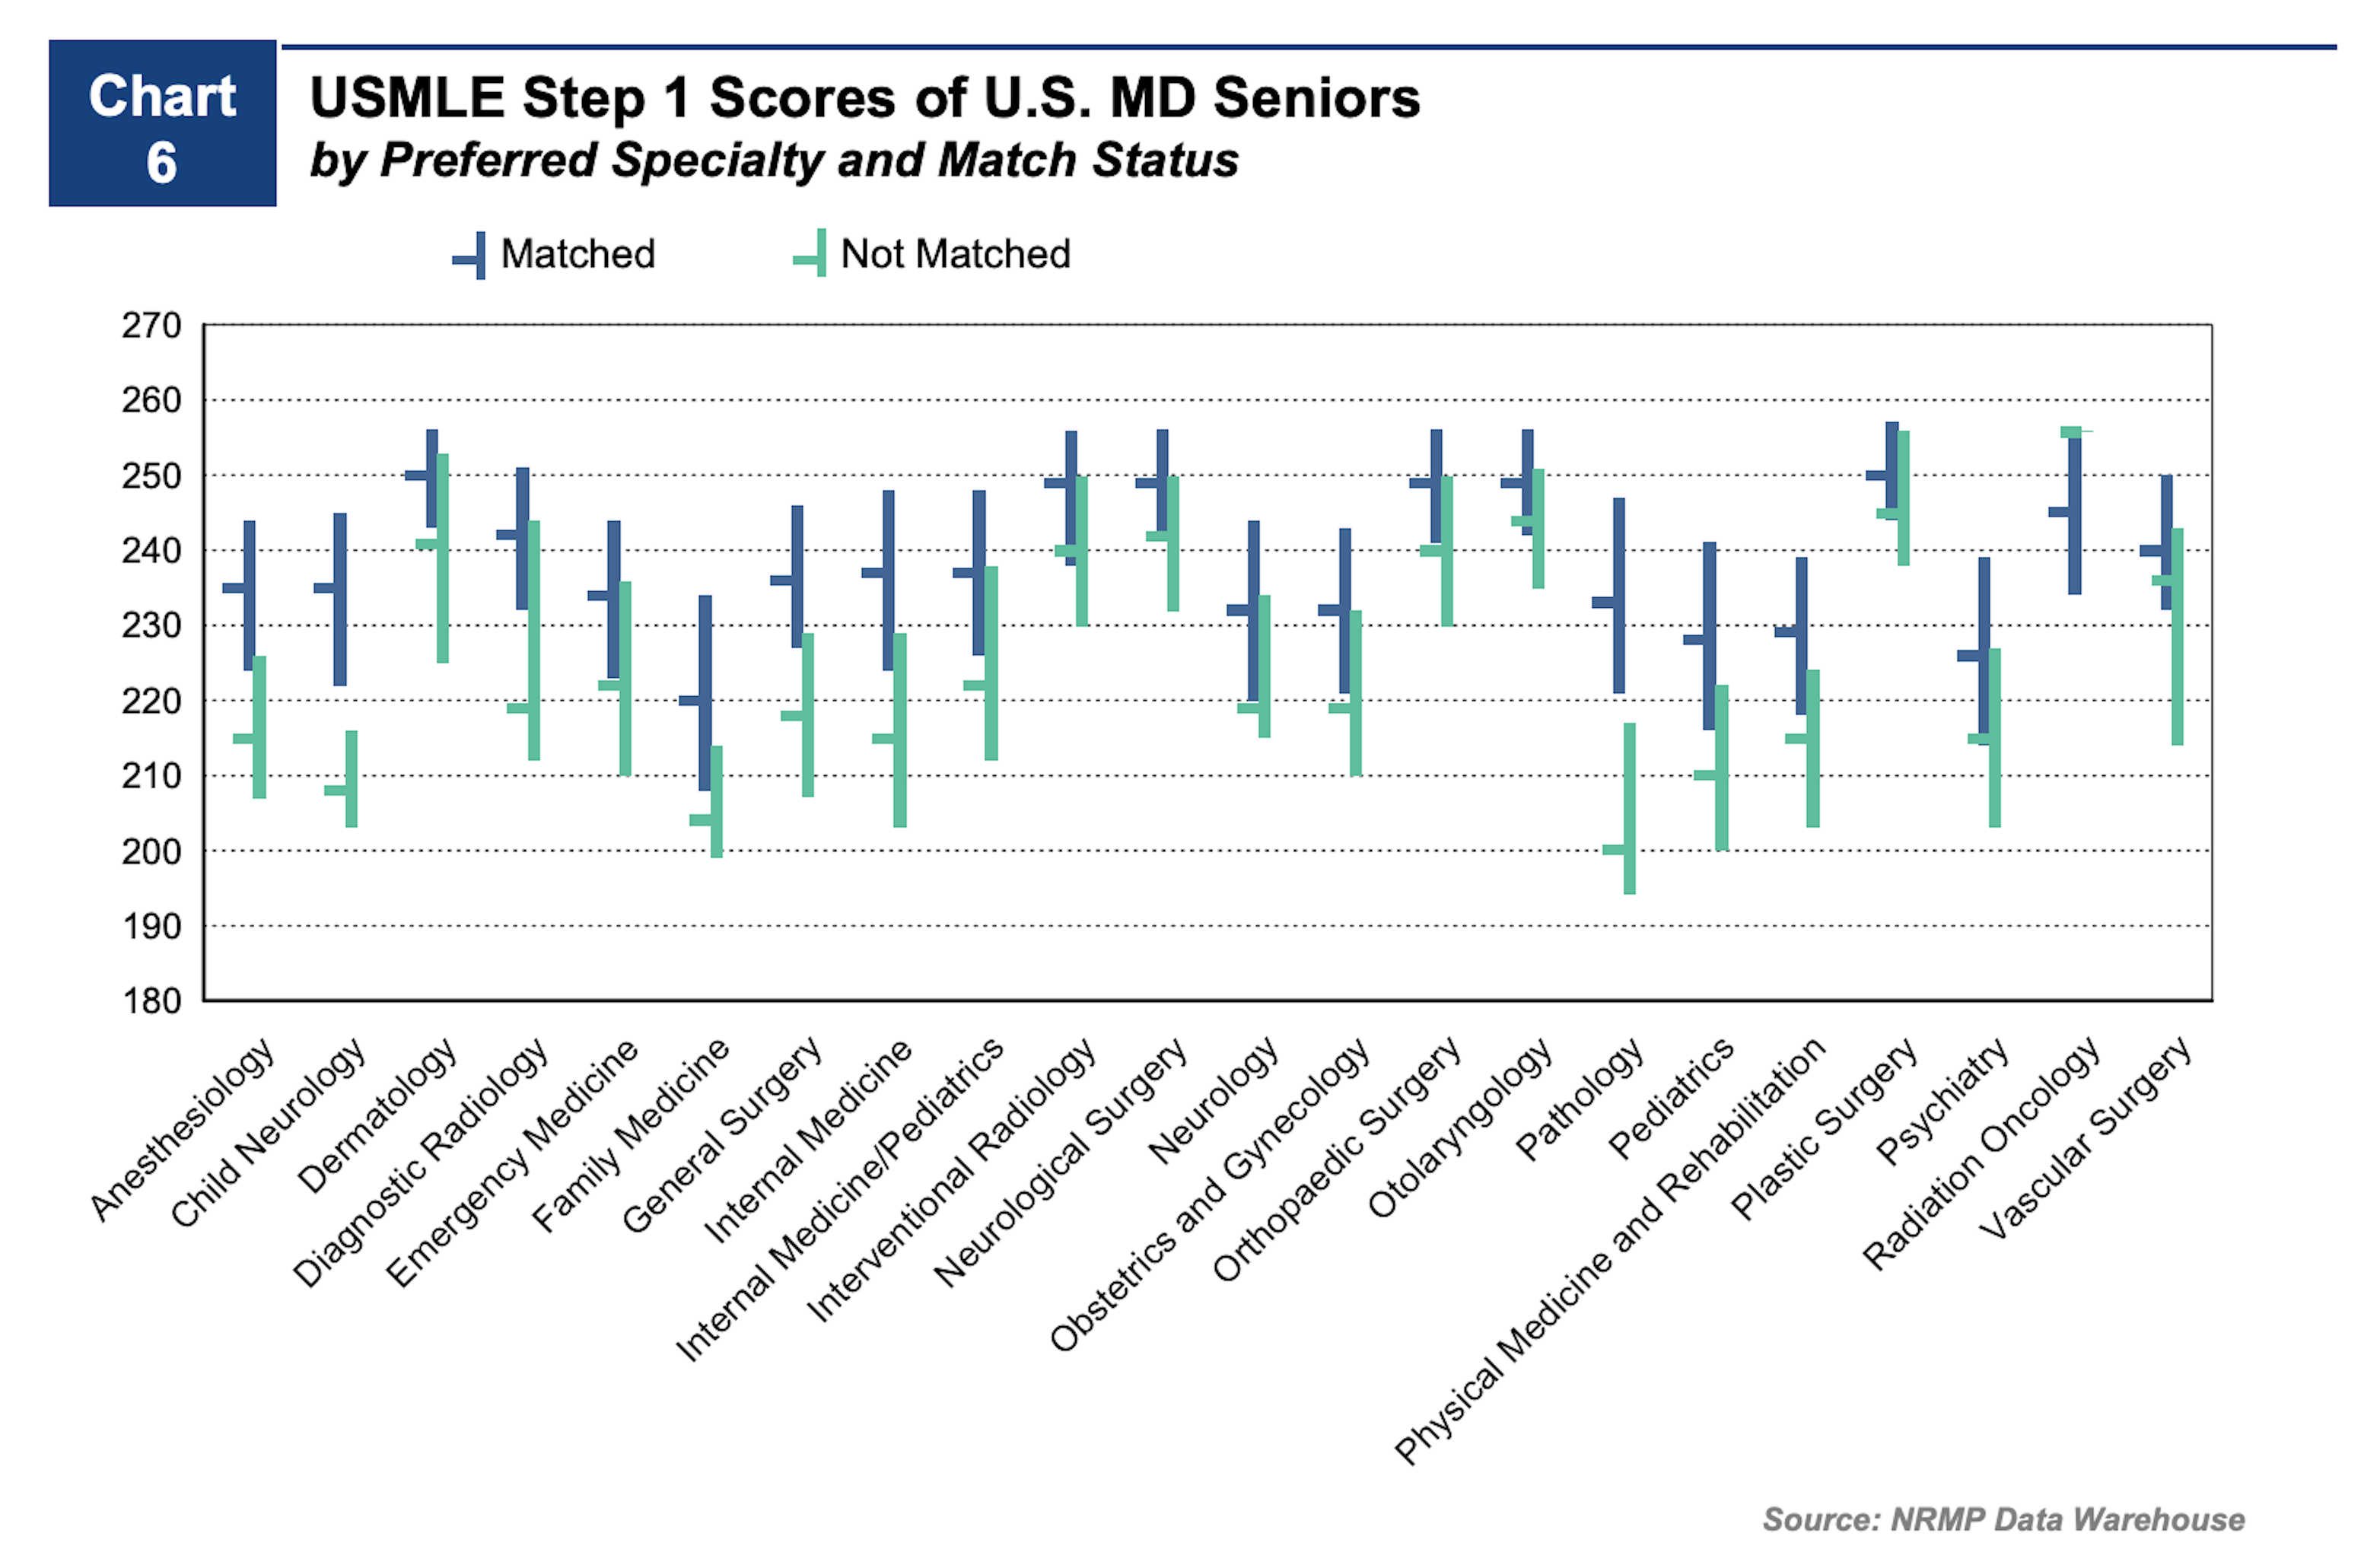 USMLE step 1 scores and percentile chart